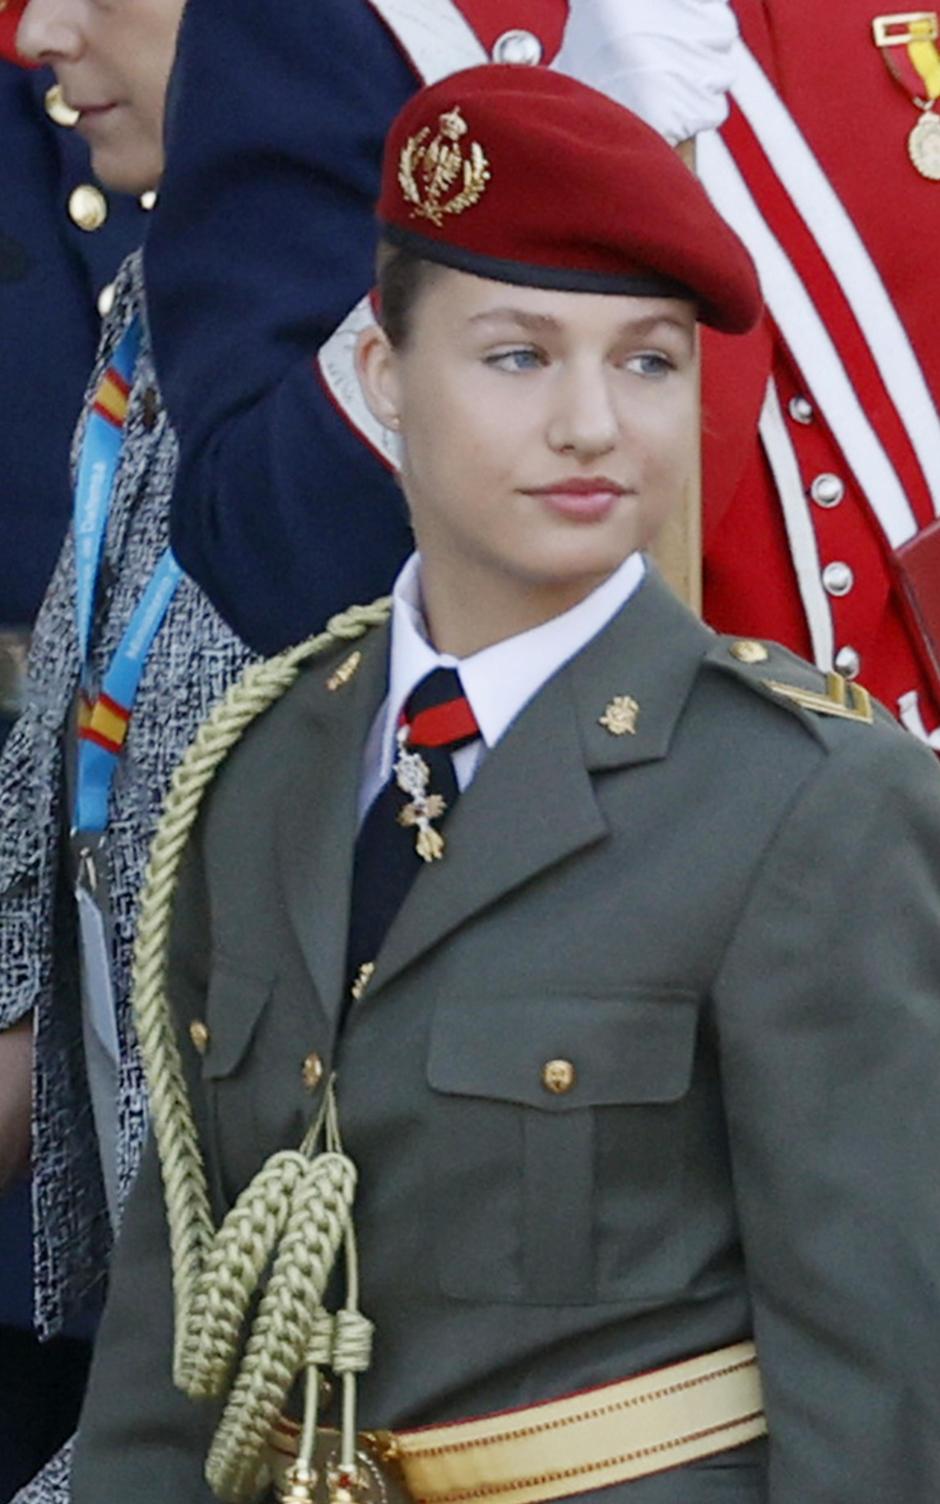 Princess Leonor de Borbon attending a military parade during the known as Dia de la Hispanidad, Spain's National Day, in Madrid, on Thursday 12, October 2023.